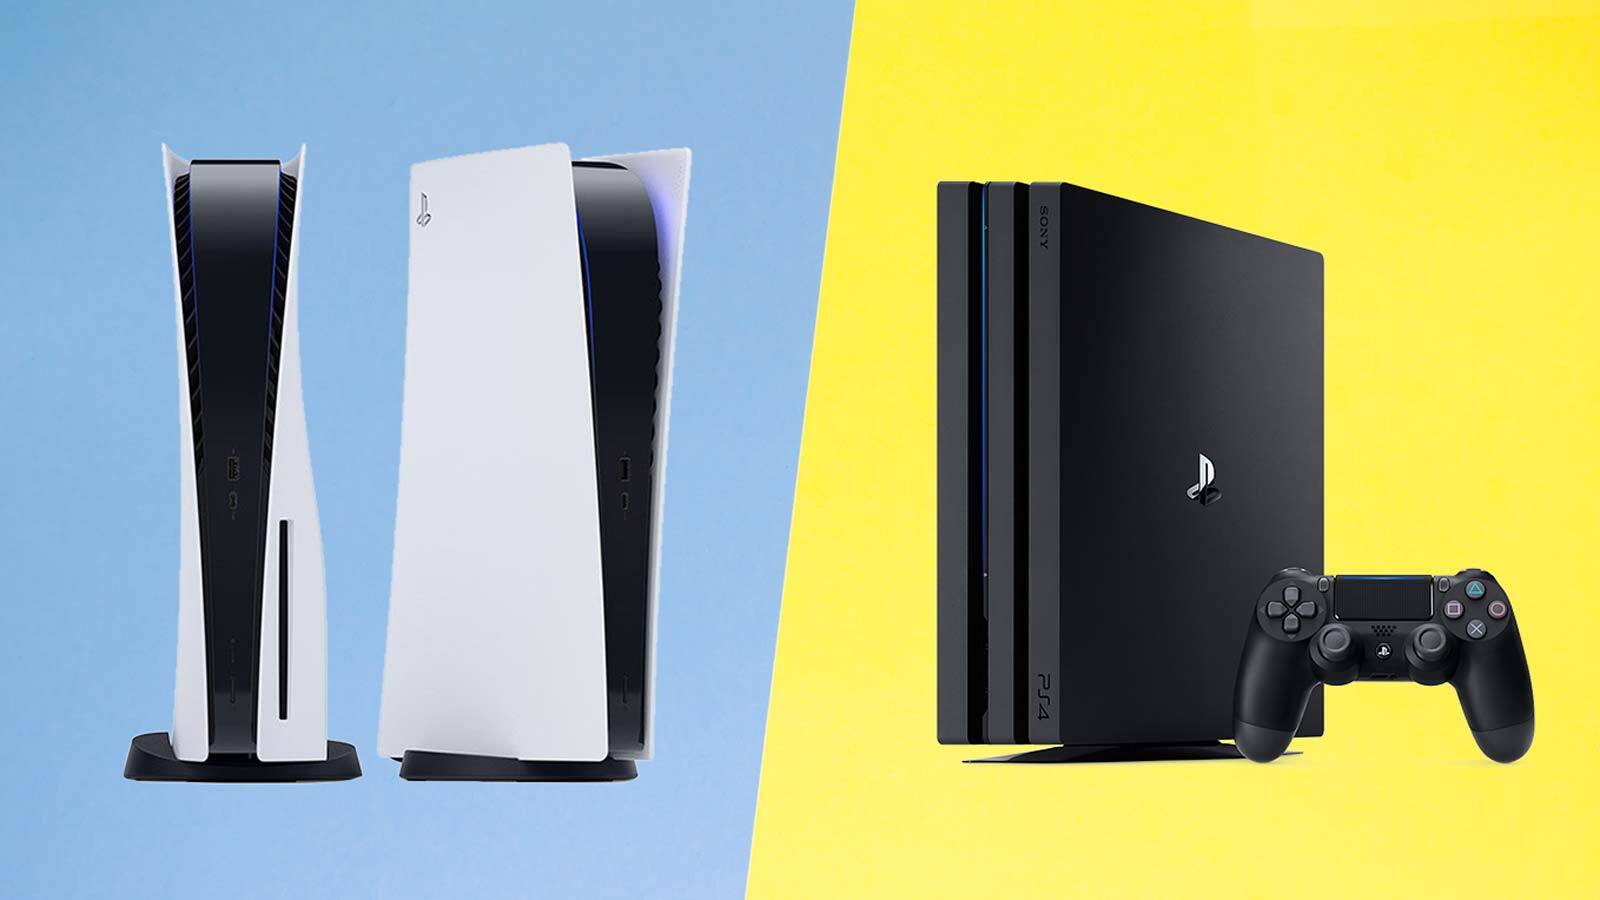 PS5 Vs PS4 Pro: Should You Upgrade to A New Console?